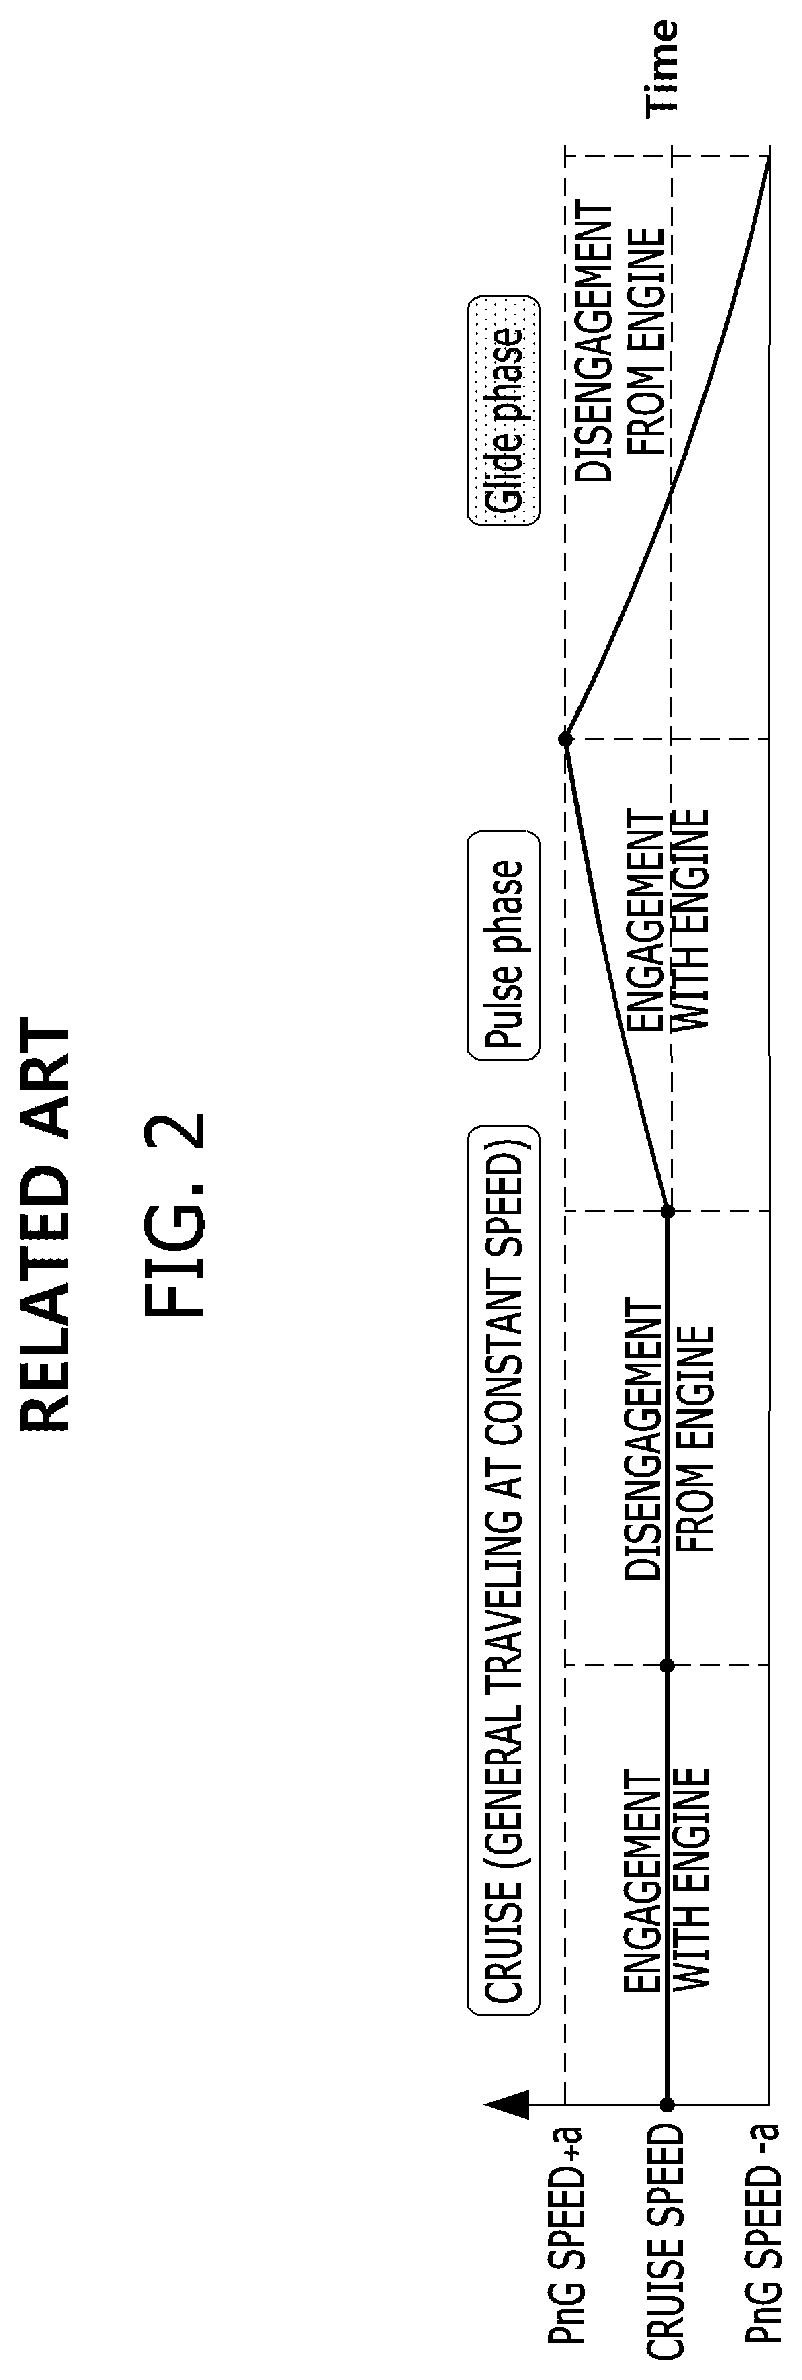 Hybrid electric vehicle and platooning control method therefor